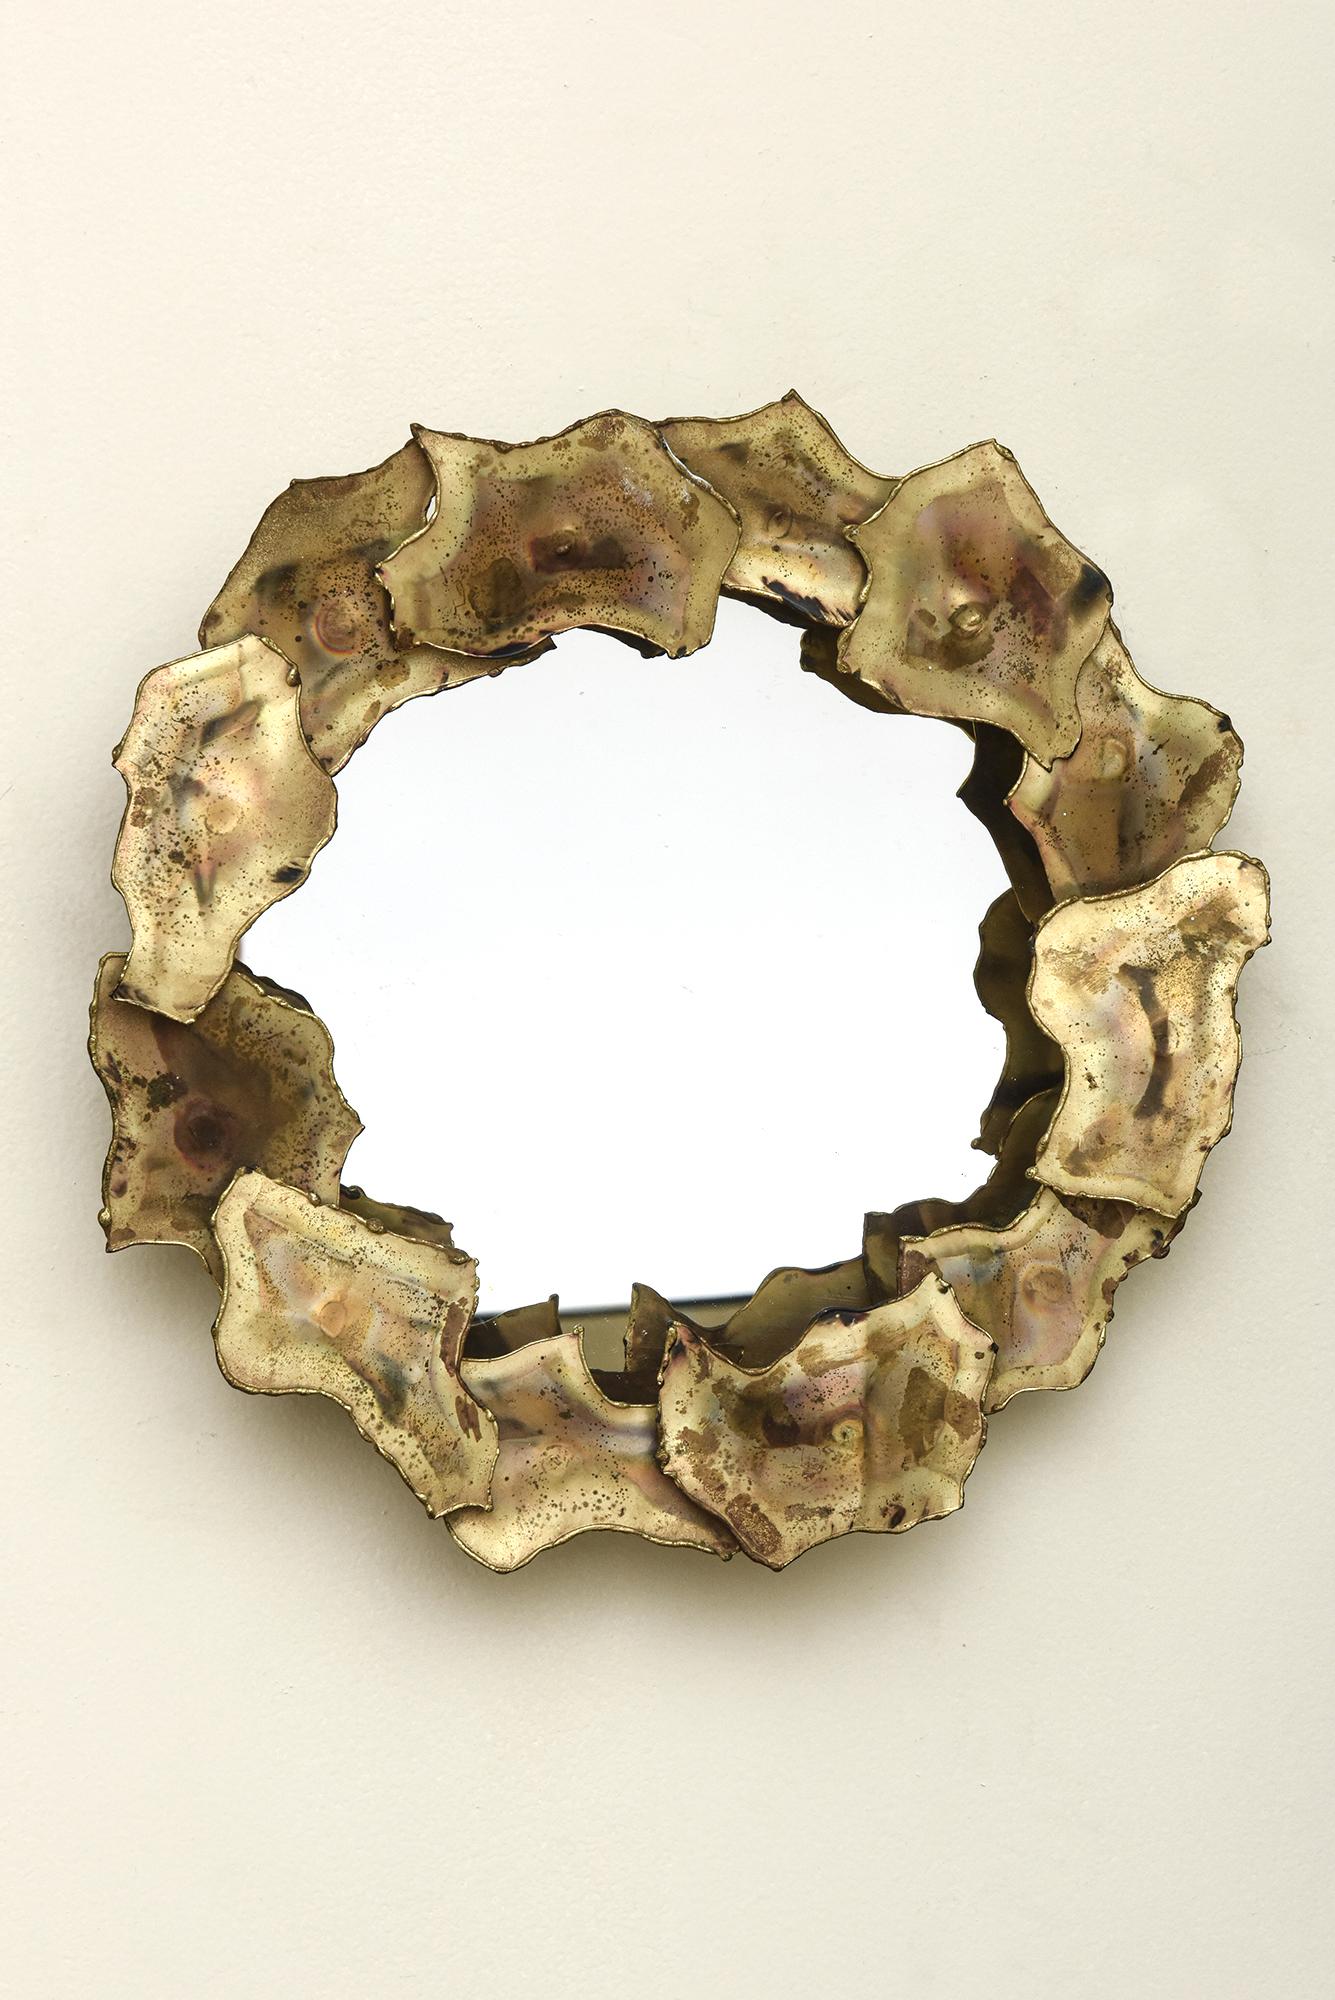 This small vintage table mirror, tray or wall mirror has torched brass elements that are set on nails to give it height. The overlapping of the brass in the style of Silas Seandel is Brutalist style. It can stand alone or be coupled with other like